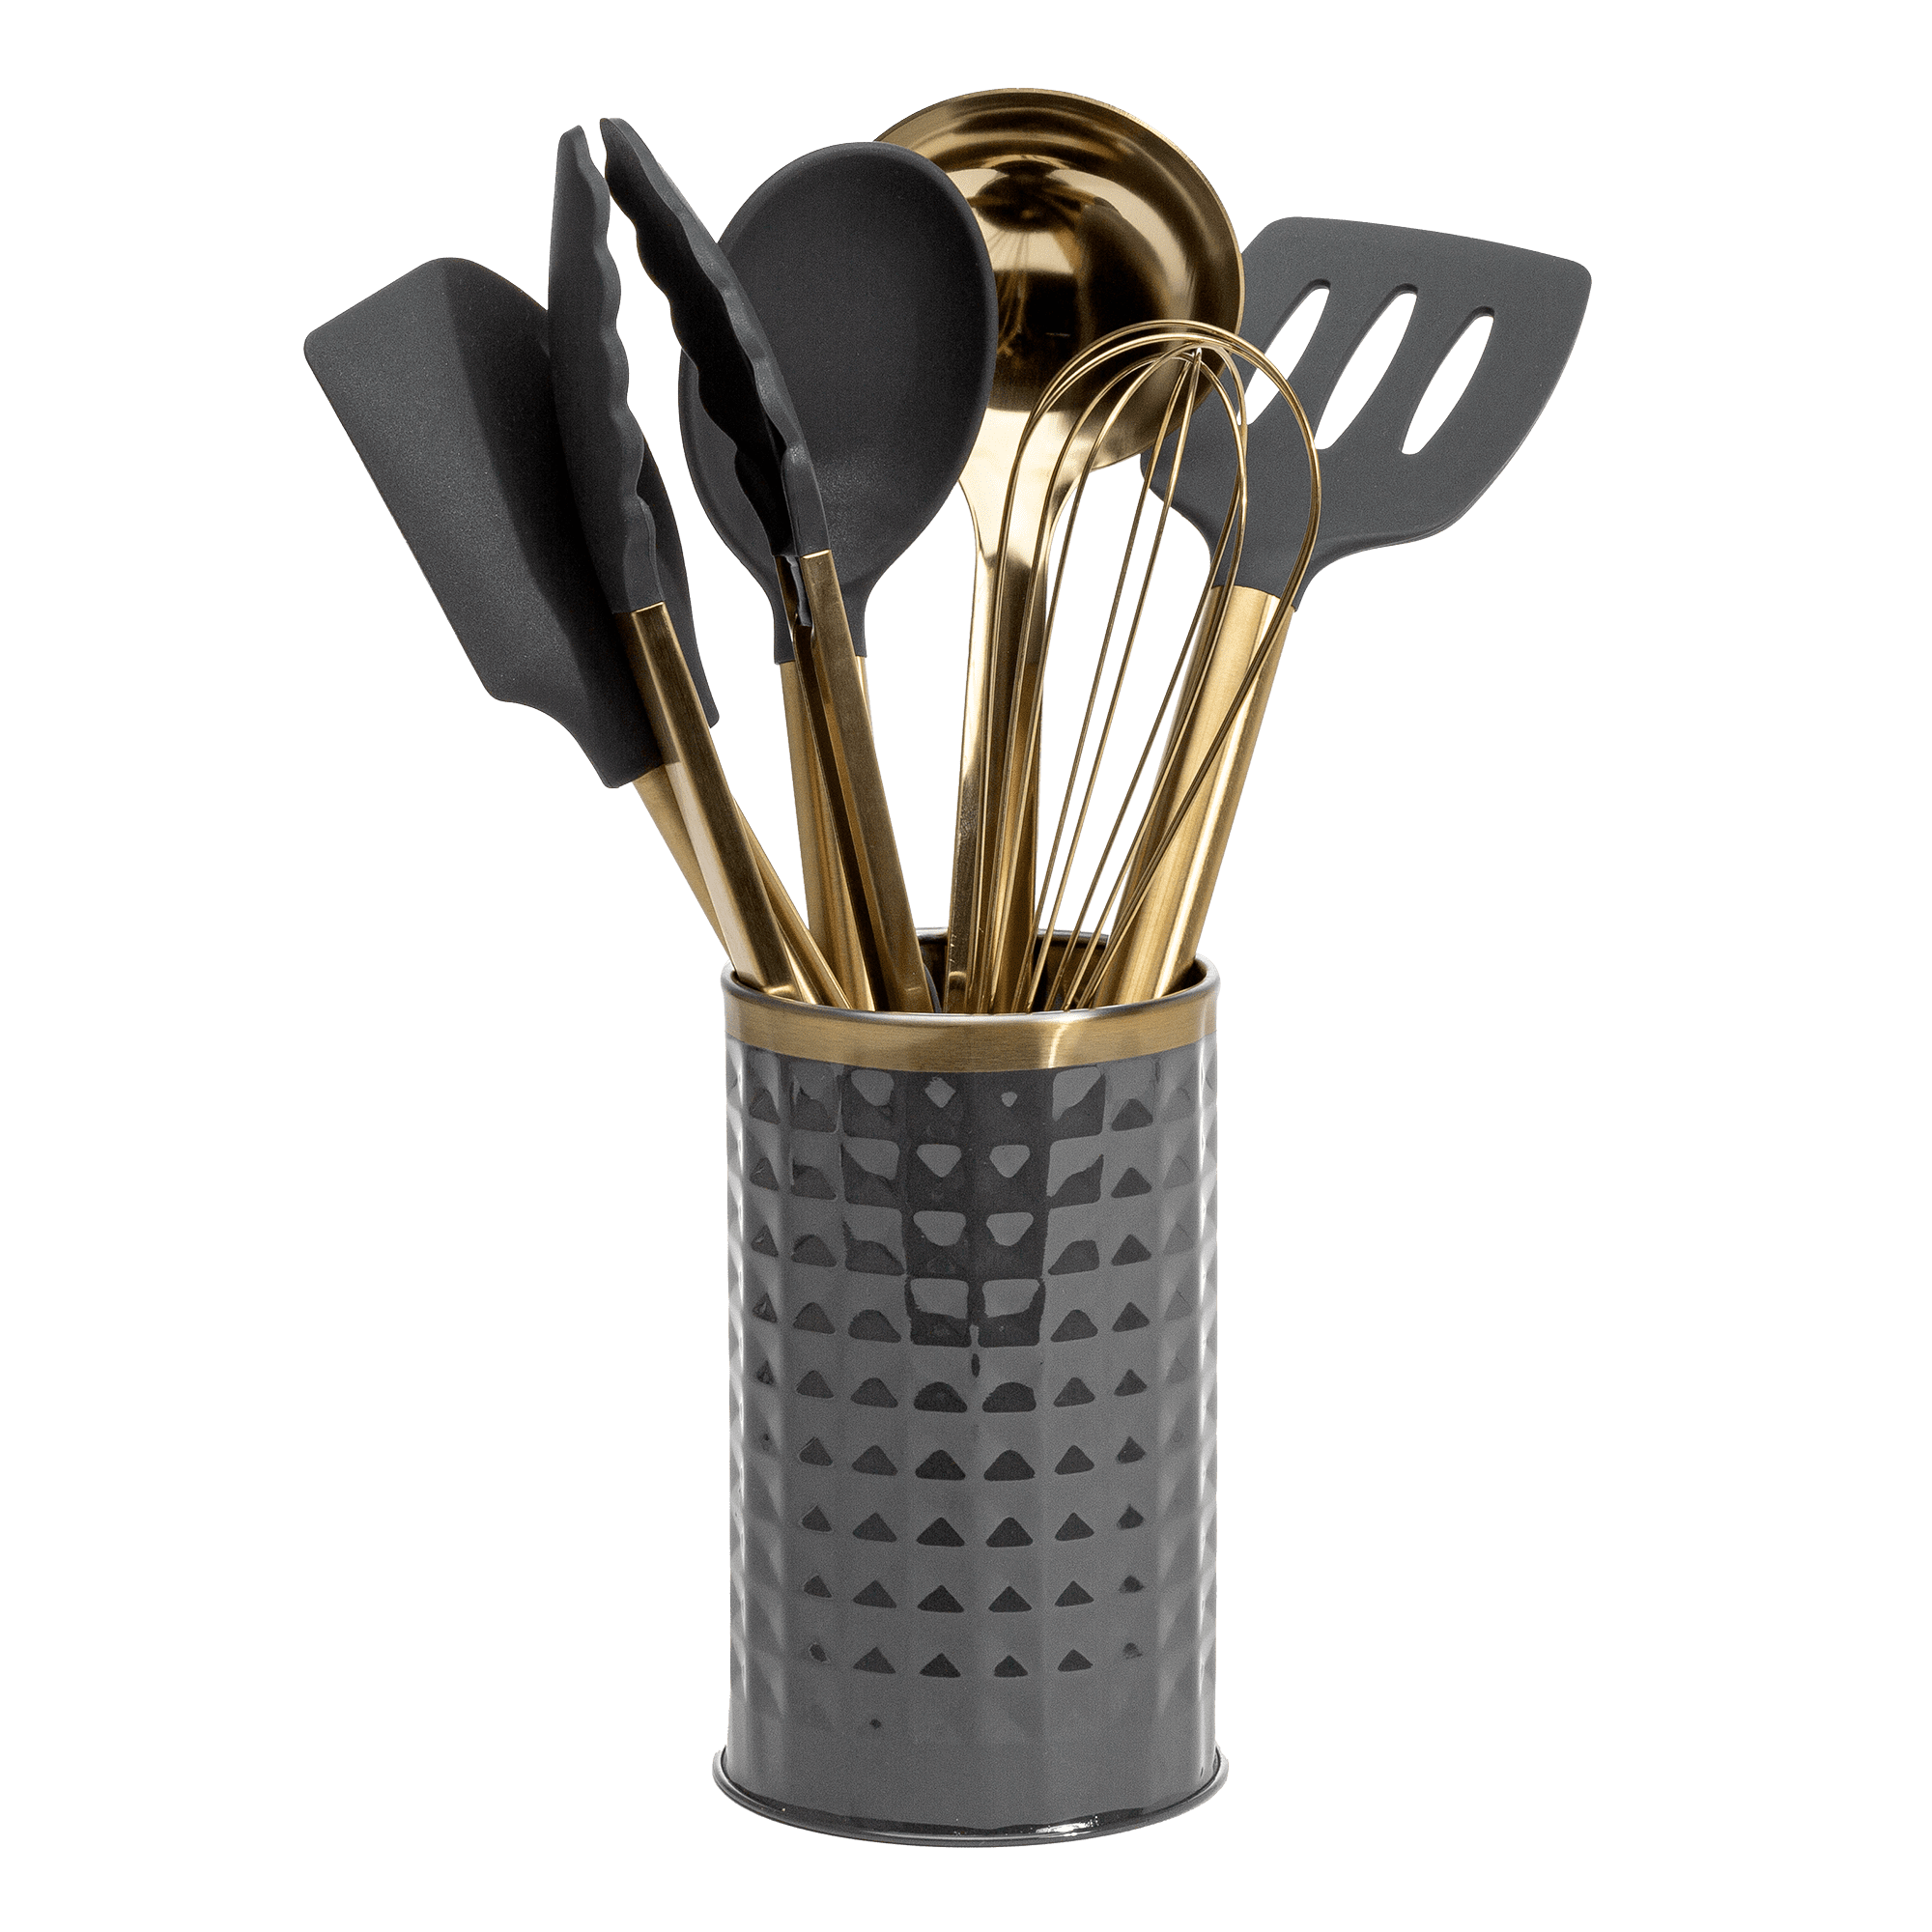 Paris Hilton Kitchen Set Tool Crock with Silicone Cooking Utensils Stainless Steel Whisk and Ladle 7-Piece Gold Charcoal Gray